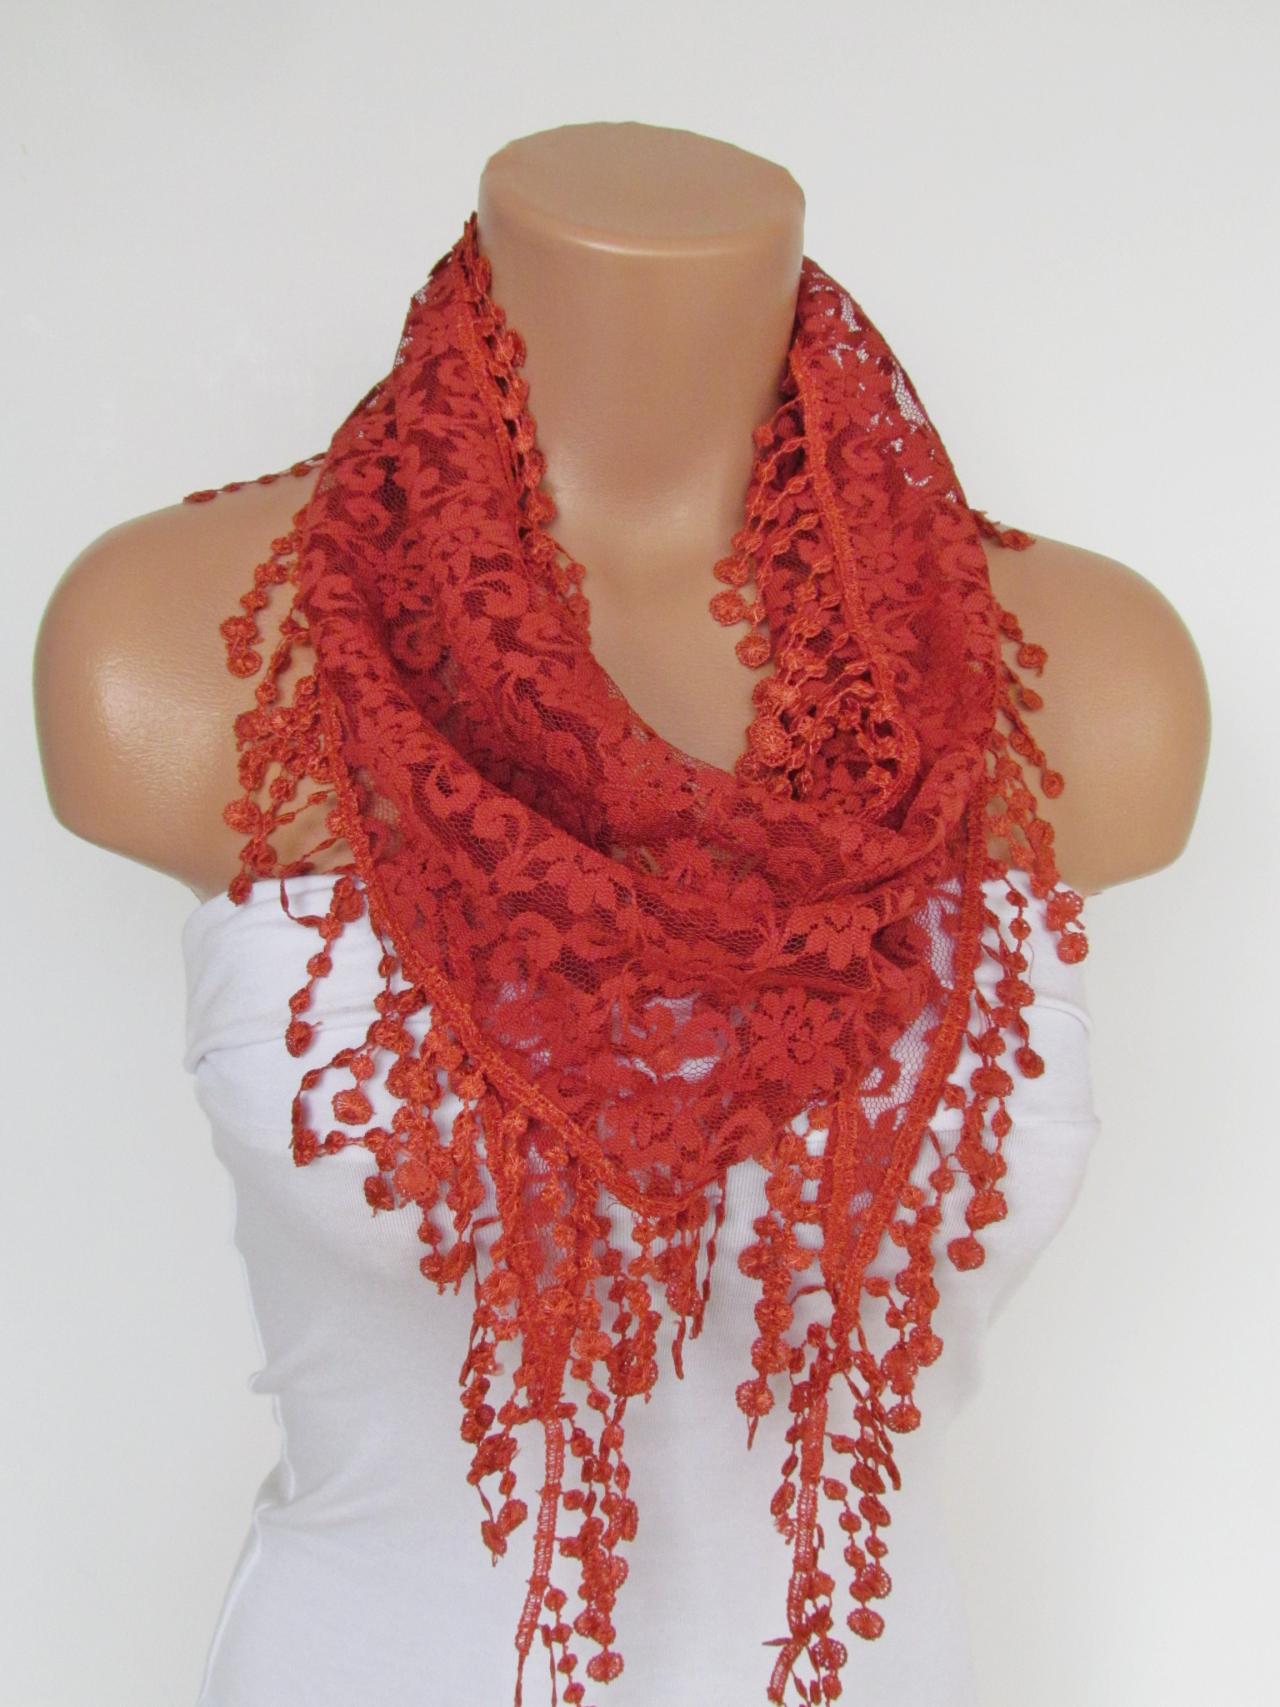 Terra-Cotta Long Scarf With Fringe-Winter Fashion Scarf-Headband-Necklace- Infinity Scarf- Winter Accessory-Long Scarf